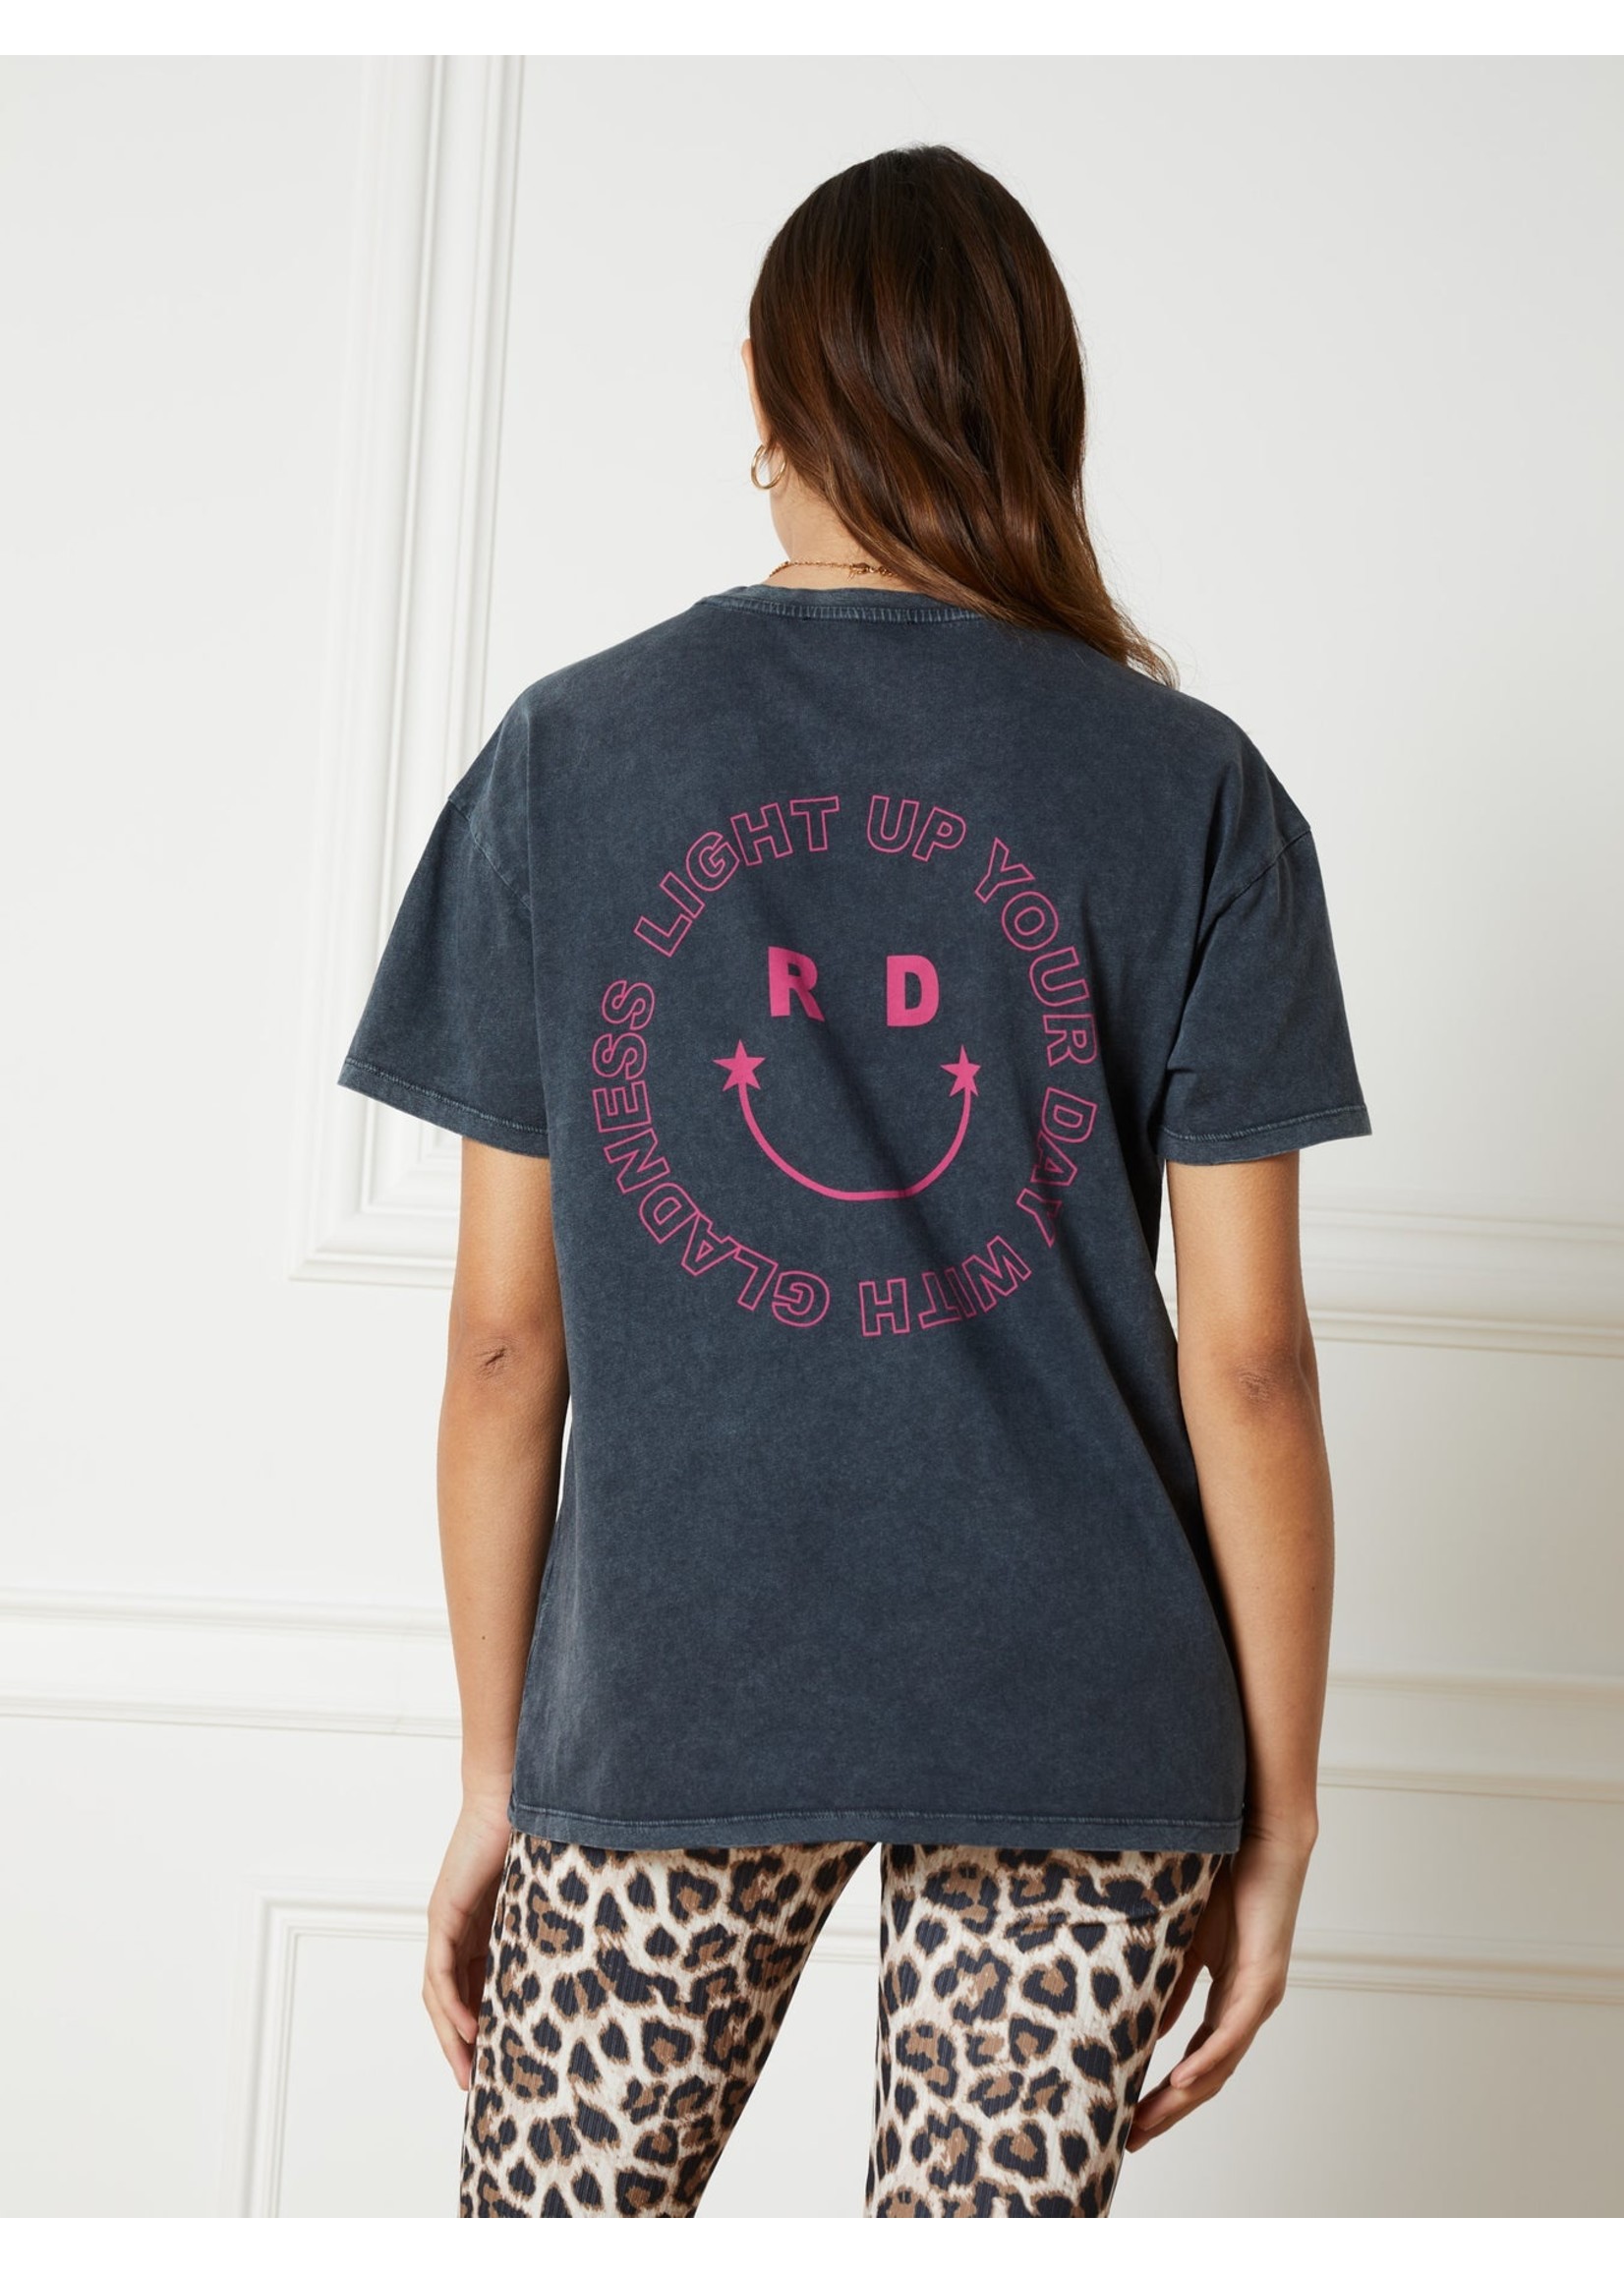 Refined Department Yoann Smiley T-shirt - Antra